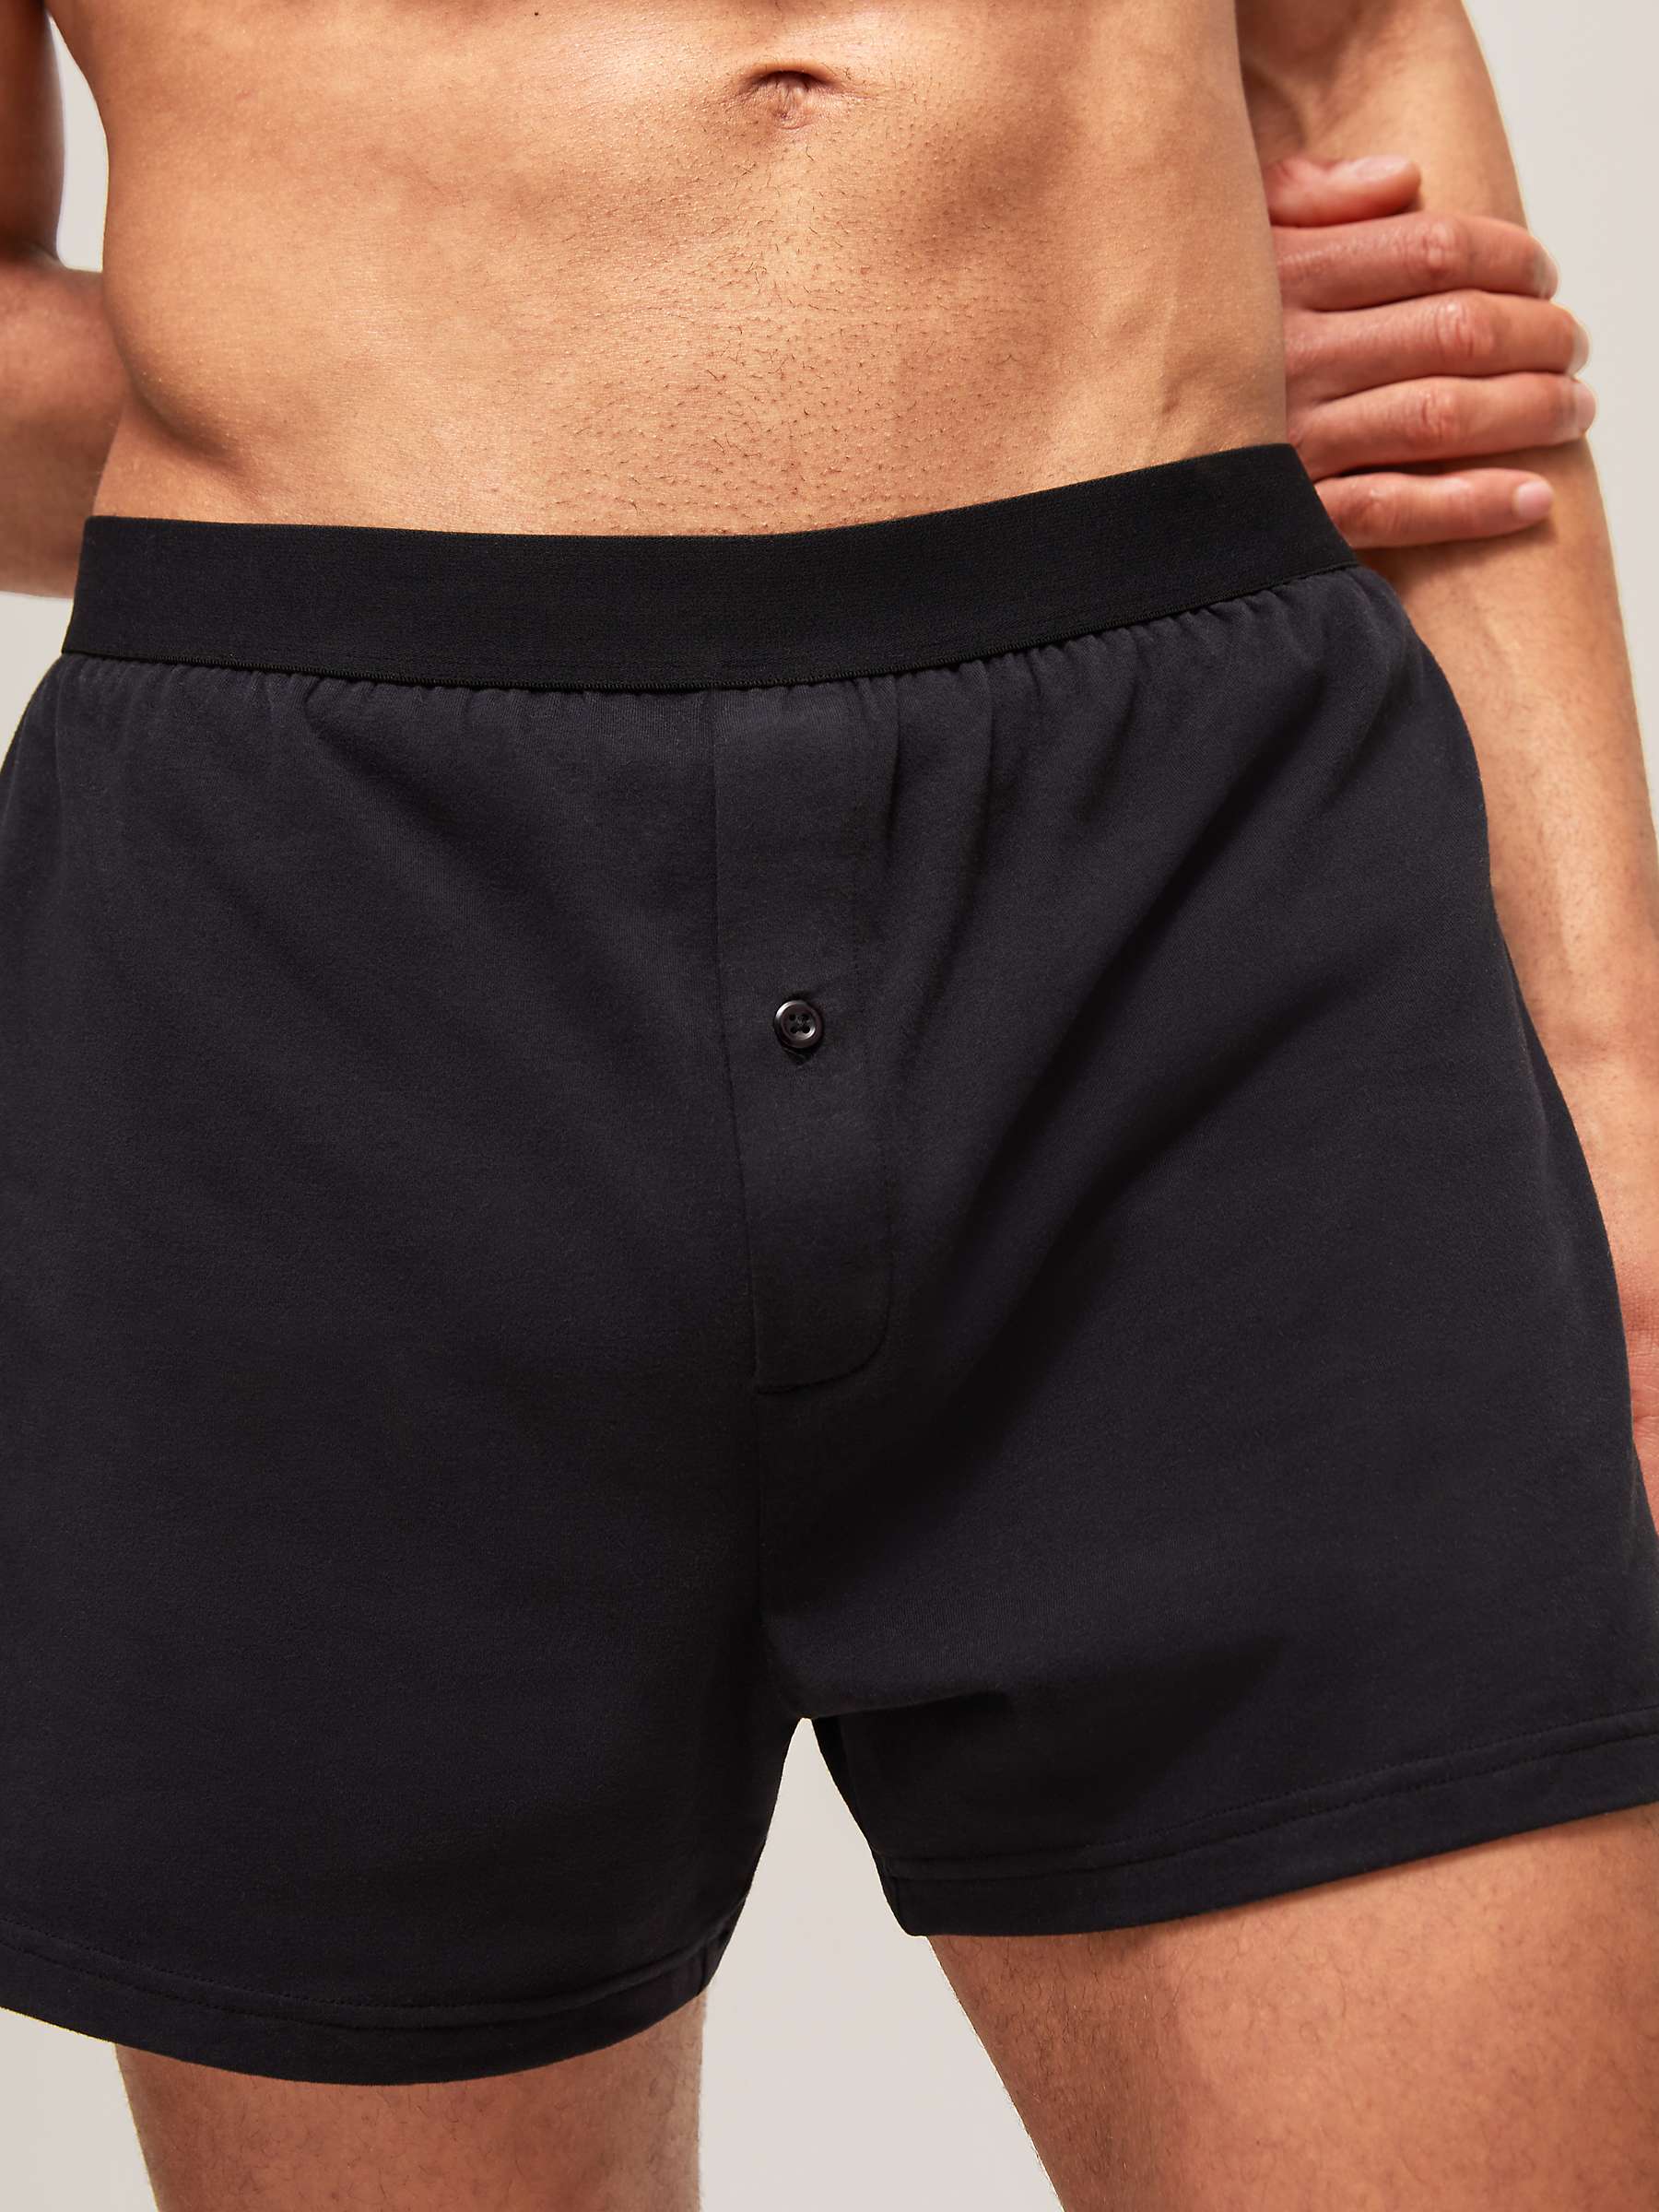 John Lewis ANYDAY Jersey Boxers, Pack of 3, Black at John Lewis & Partners